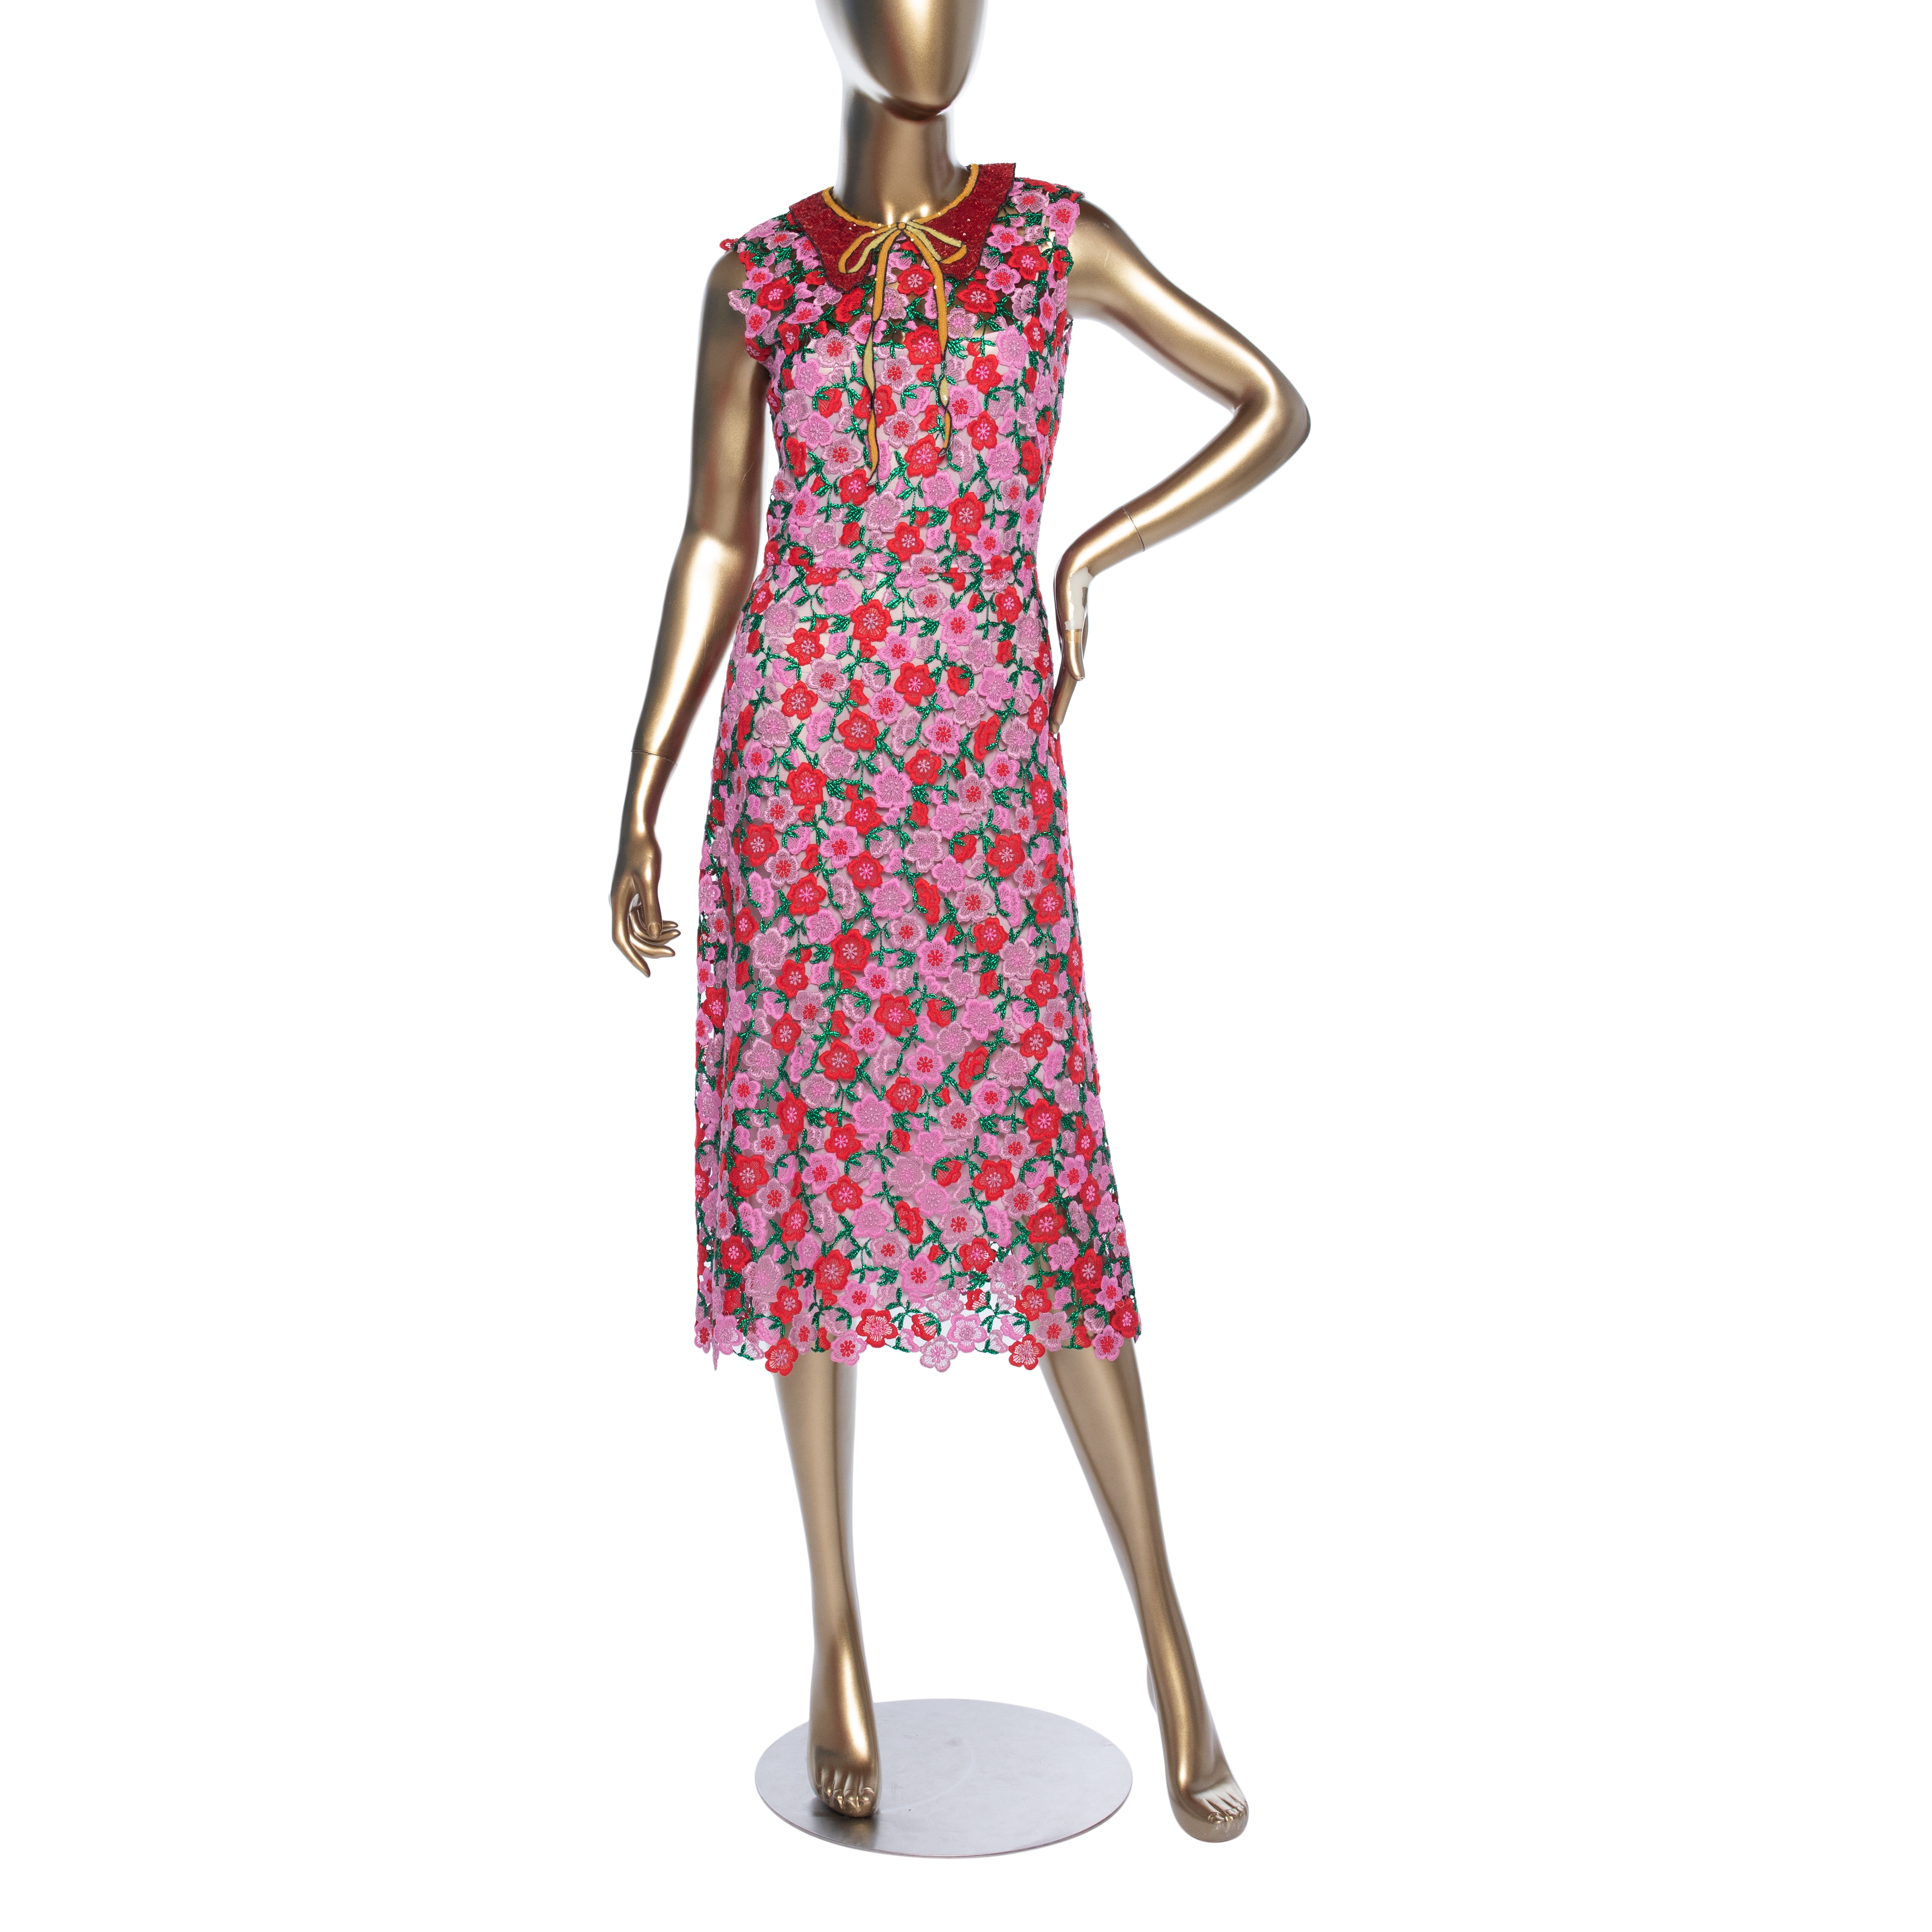 GUCCI EMBROIDERED DRESS - Janet Mandell